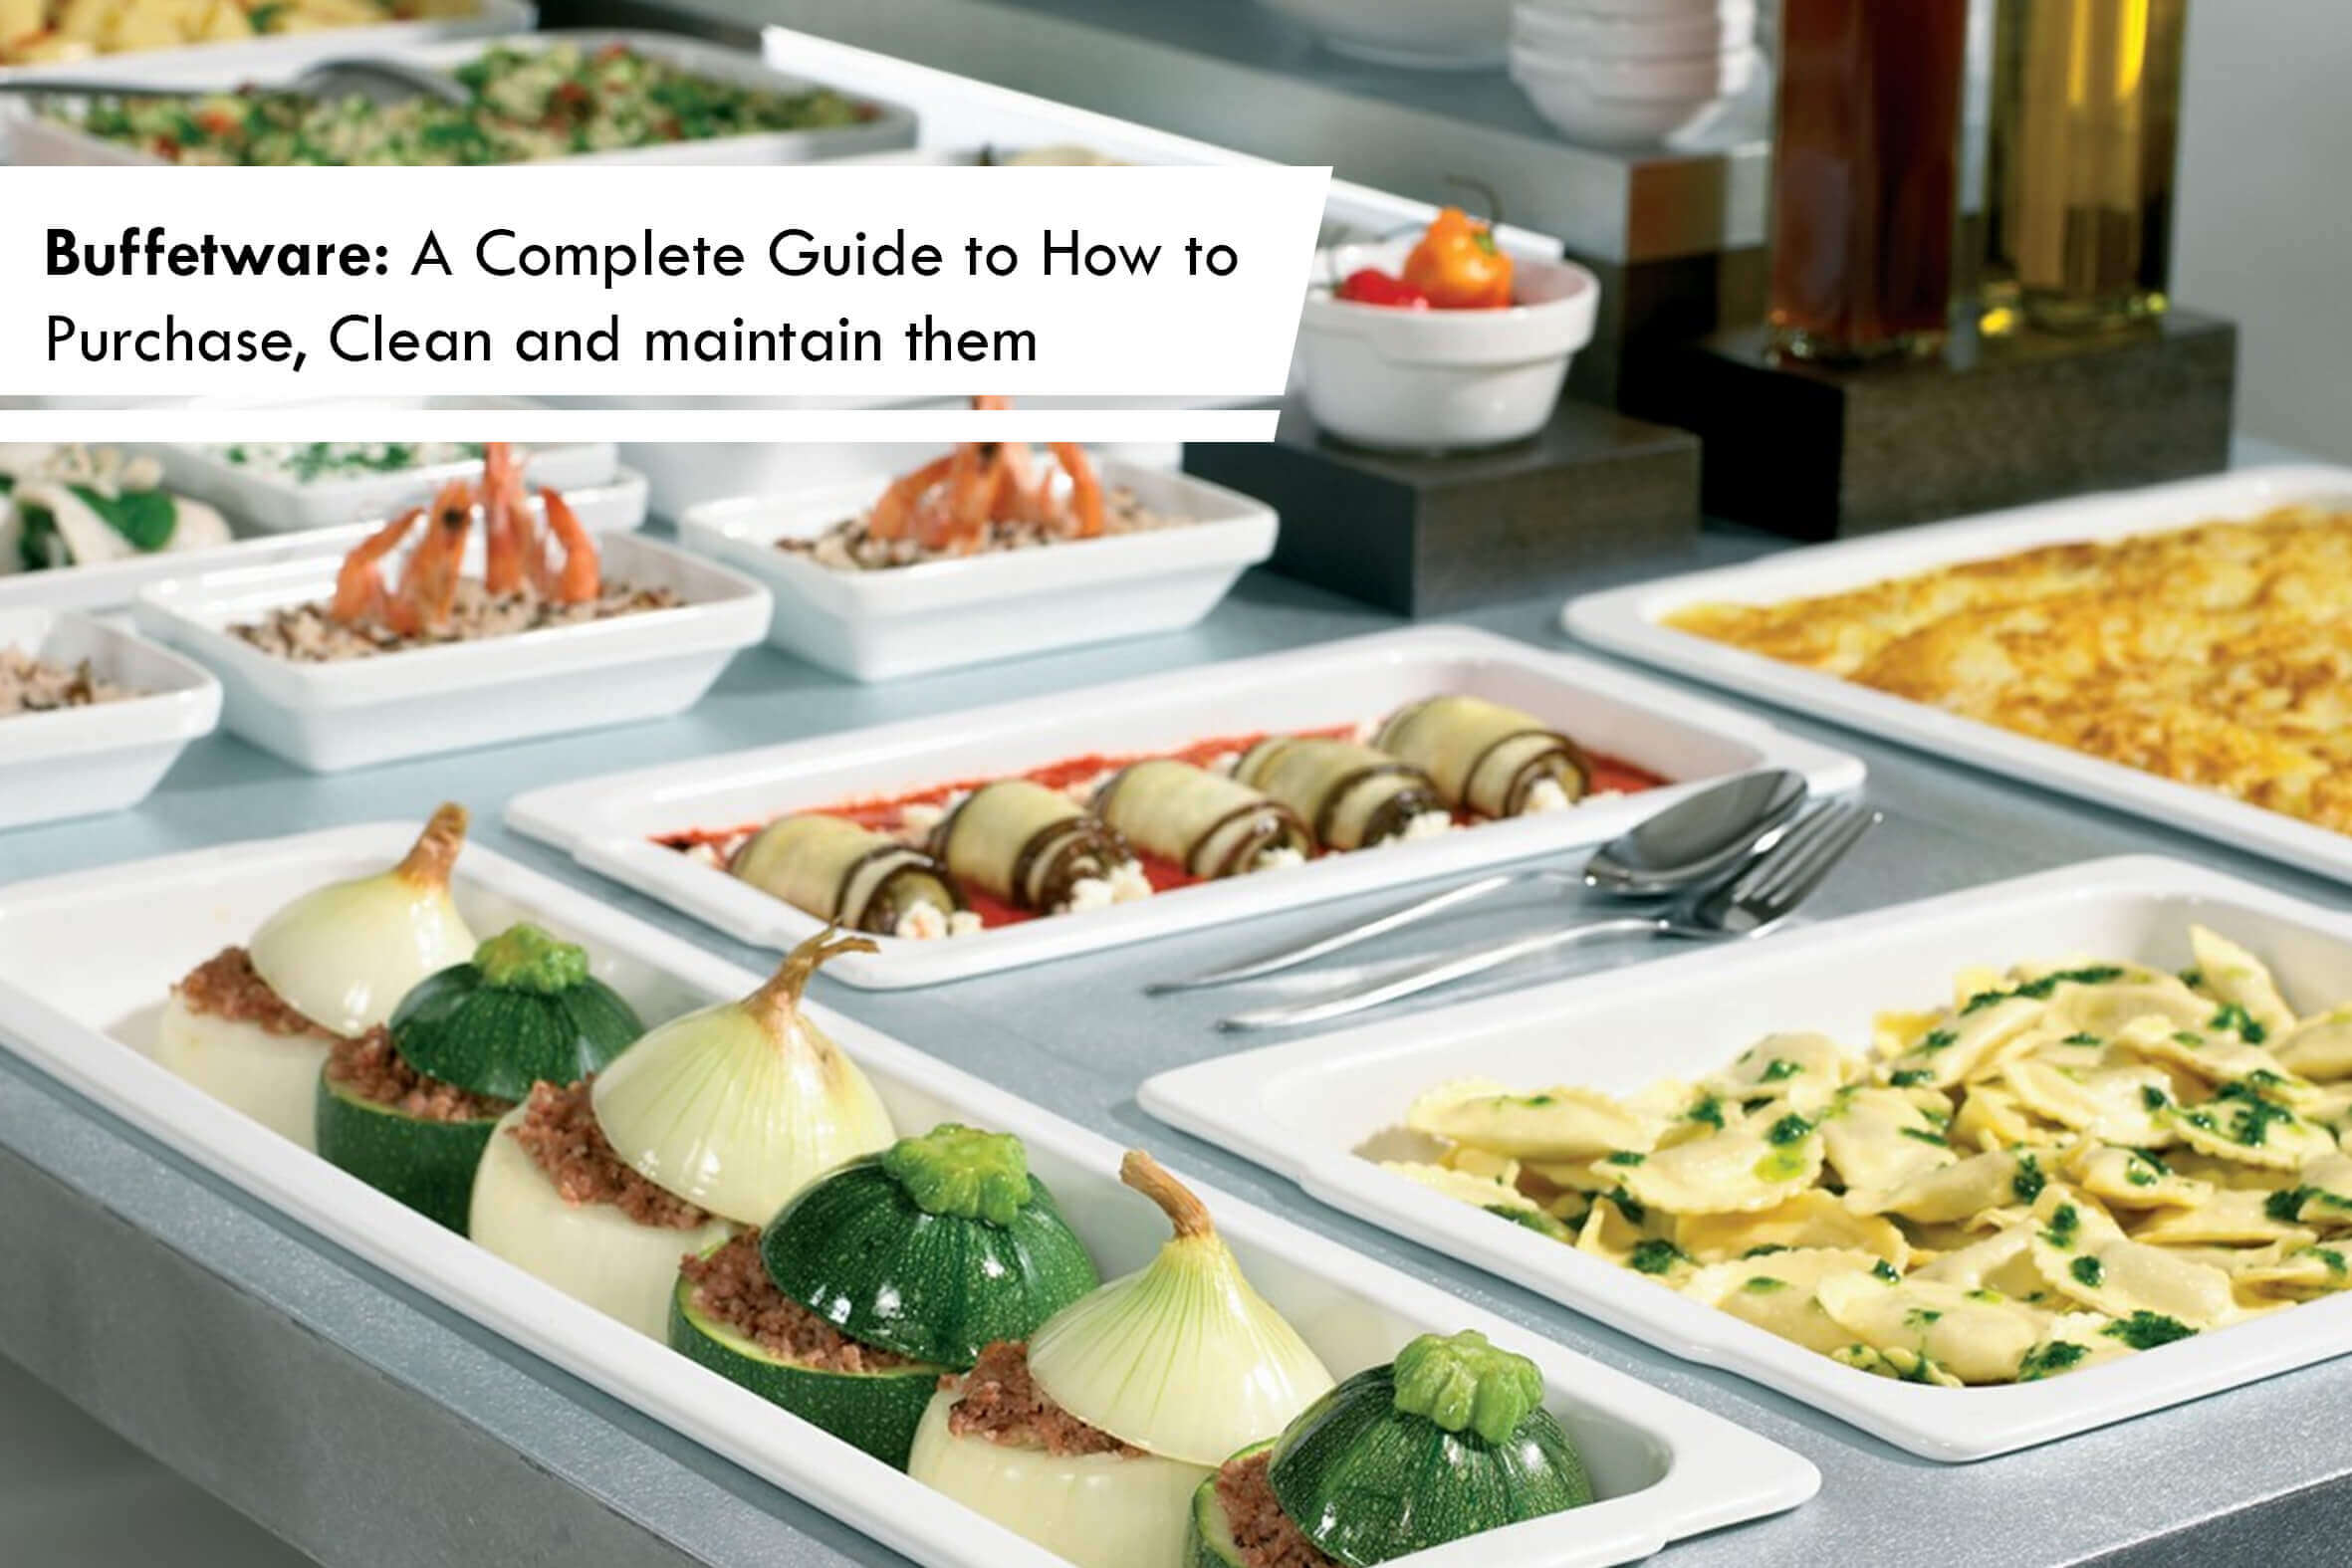 Buffetware: Types, How to Purchase, Clean and Maintain them